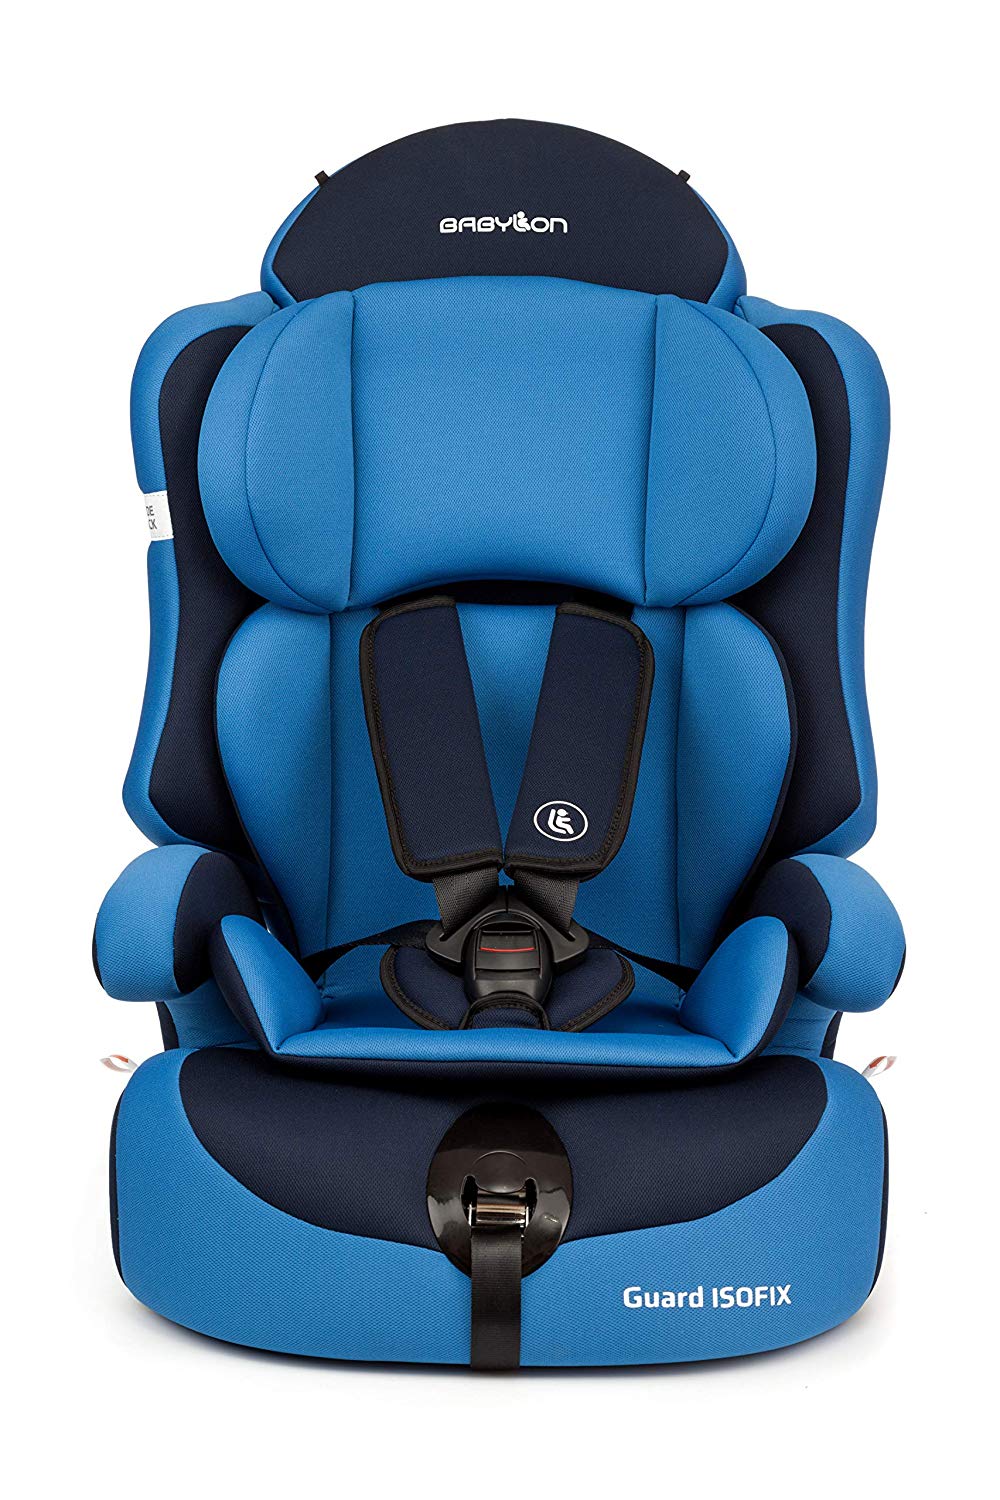 Babylon Guard ISOFIX Child Car Seat Group 1/2/3, 9-36 kg Child Seat with Isofix and Top Tether 5 Point Safety Belt Car Seat Adjustable Headrest ECE R44/04 Blue